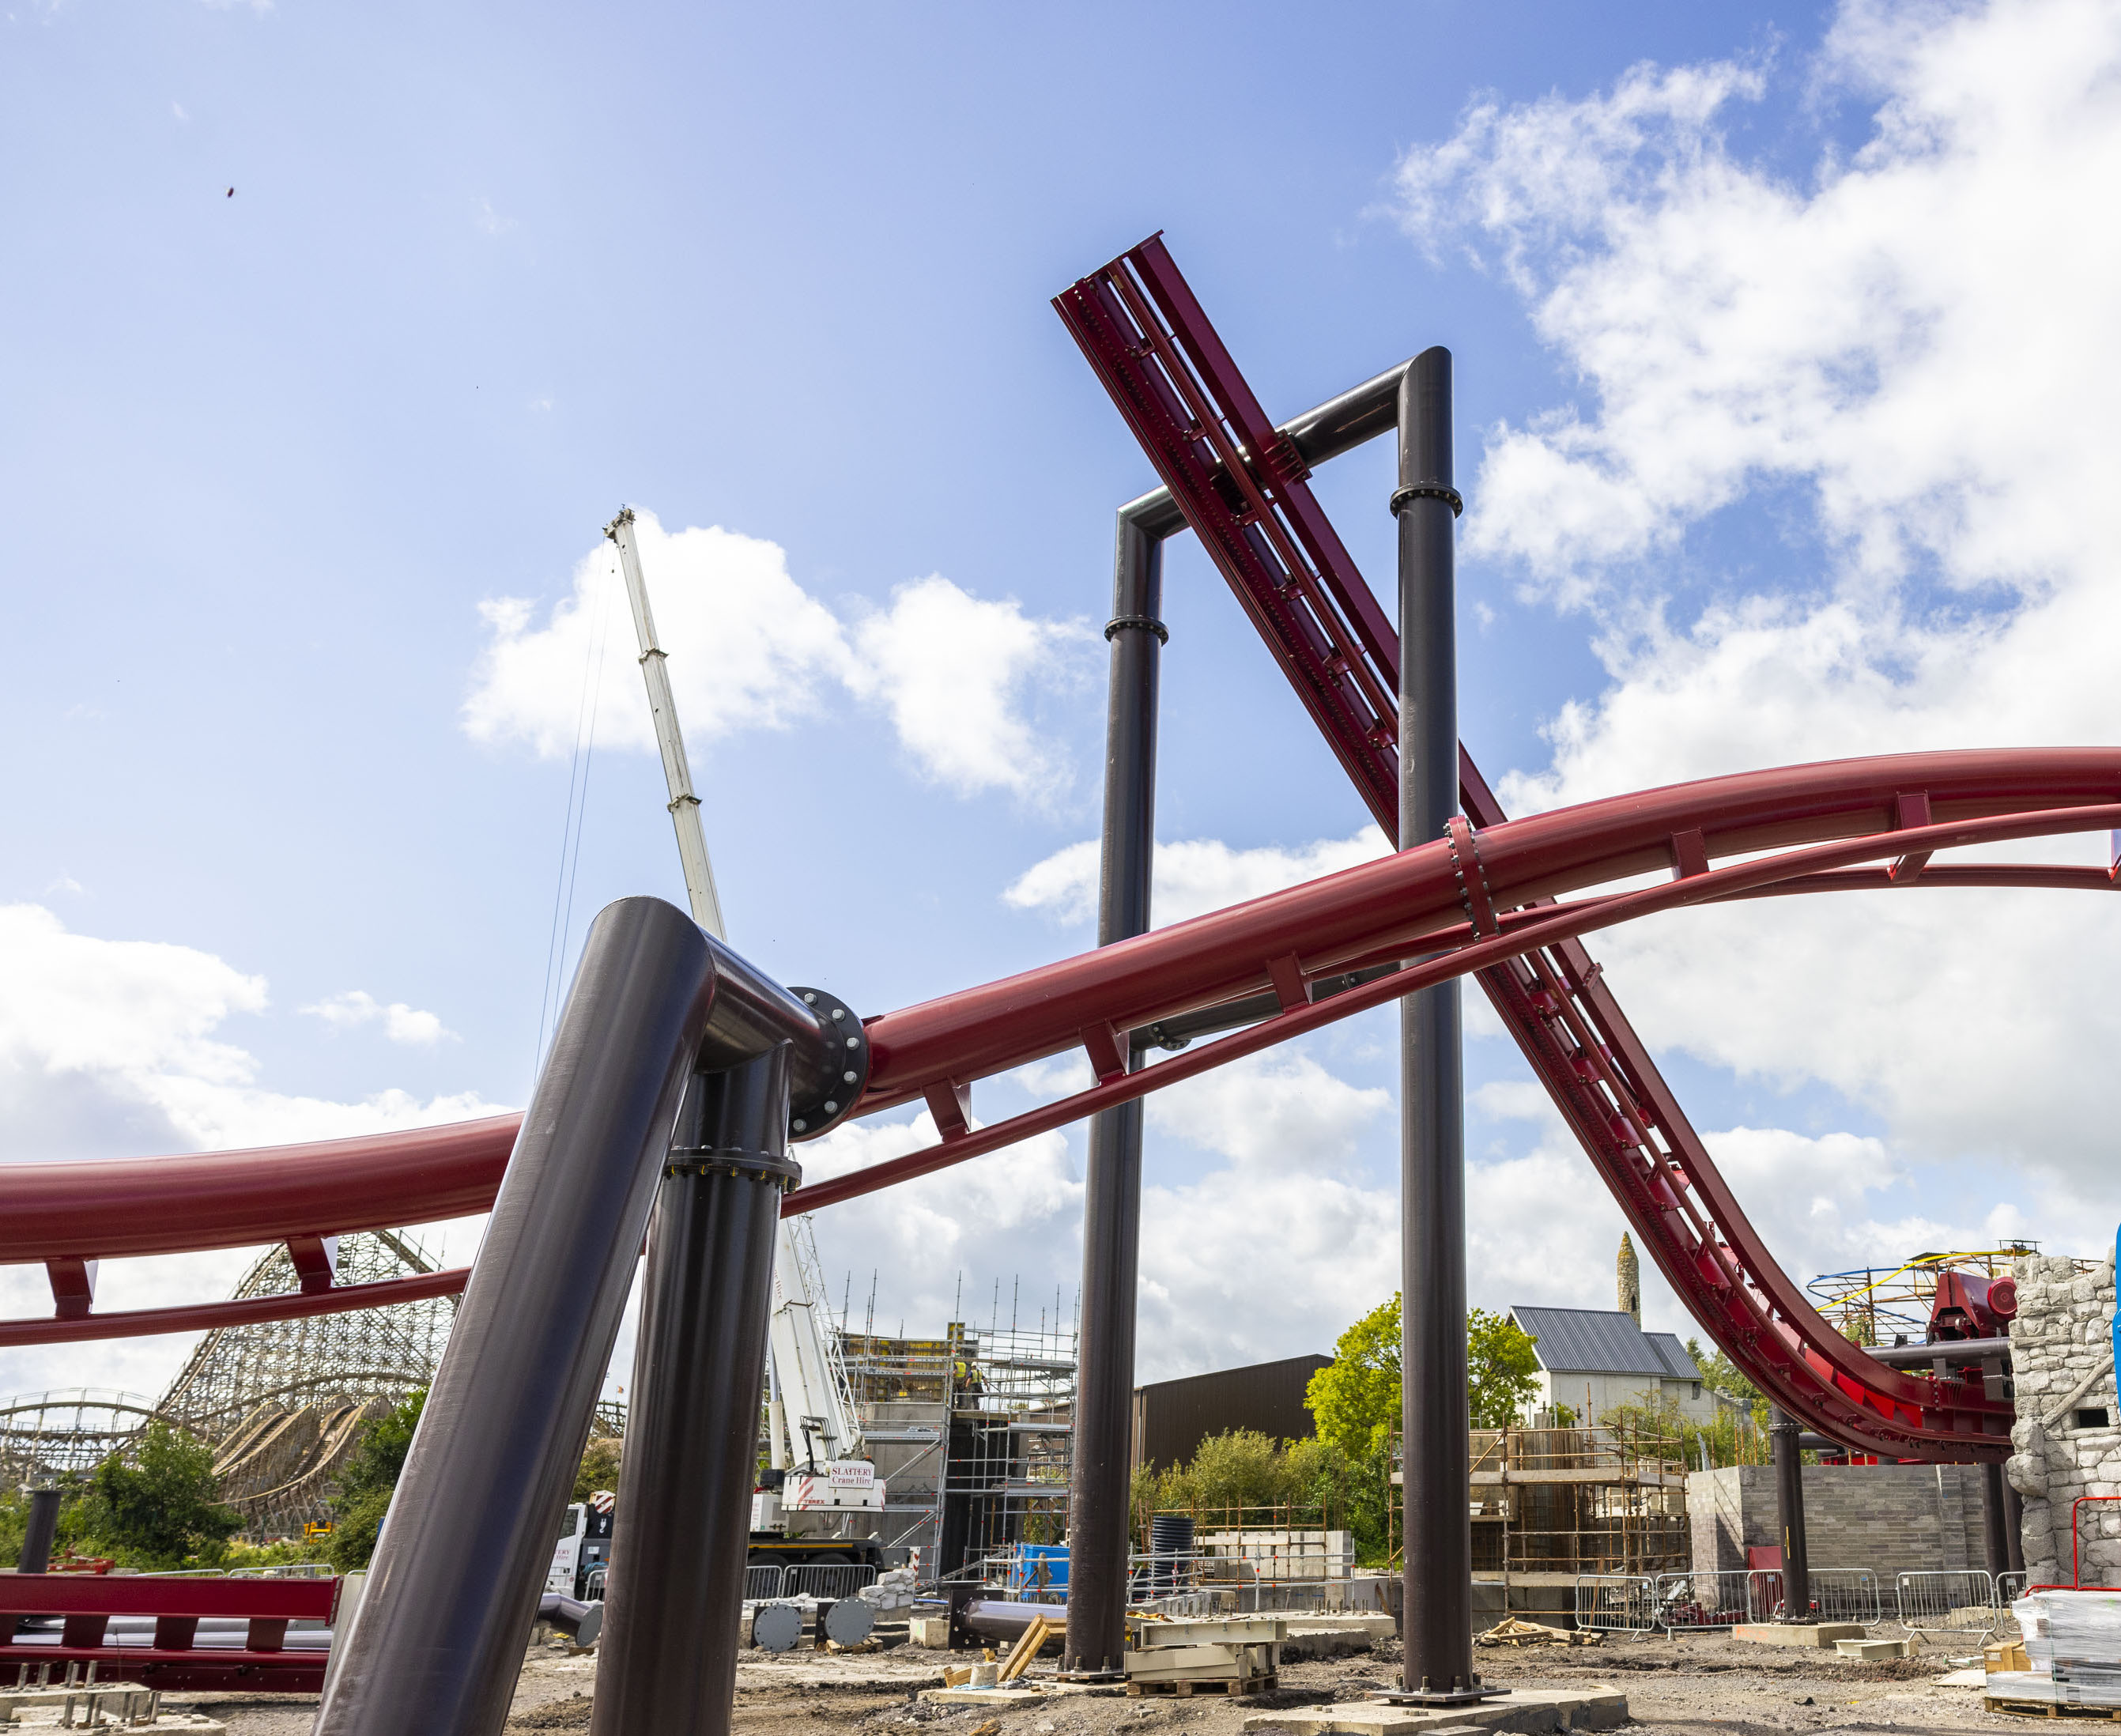 a red rollercoaster track being built